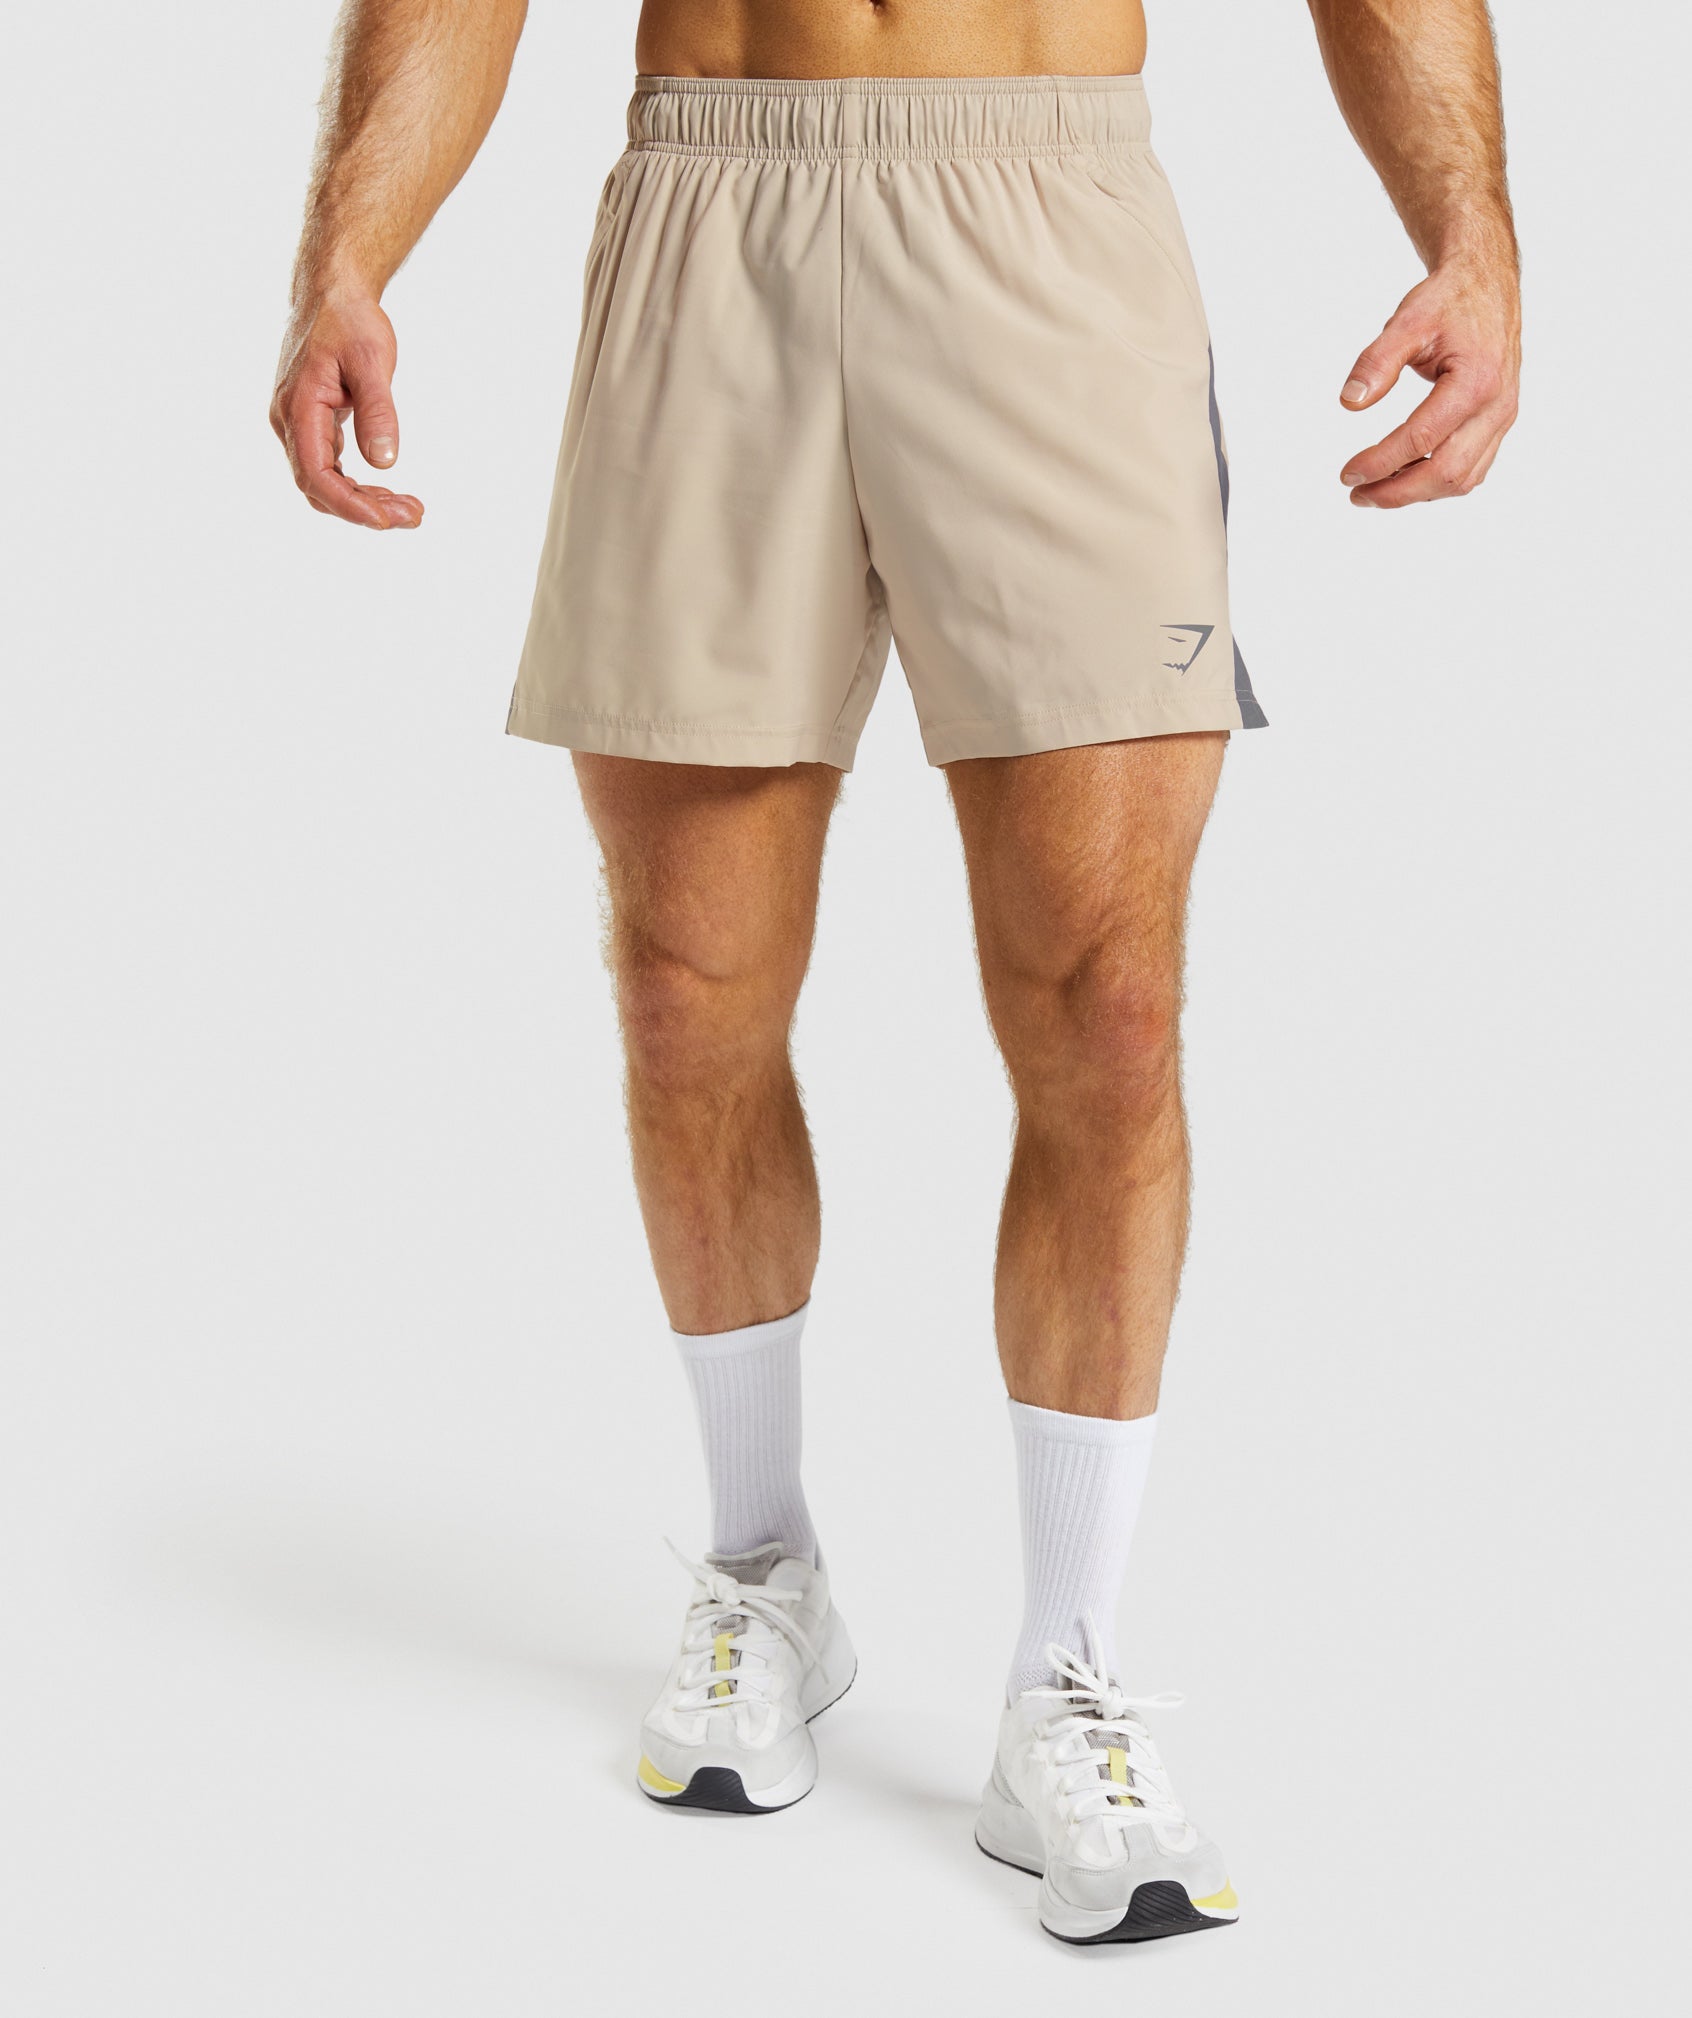 Sport 7" Short in Toasted Brown/Silhouette Grey